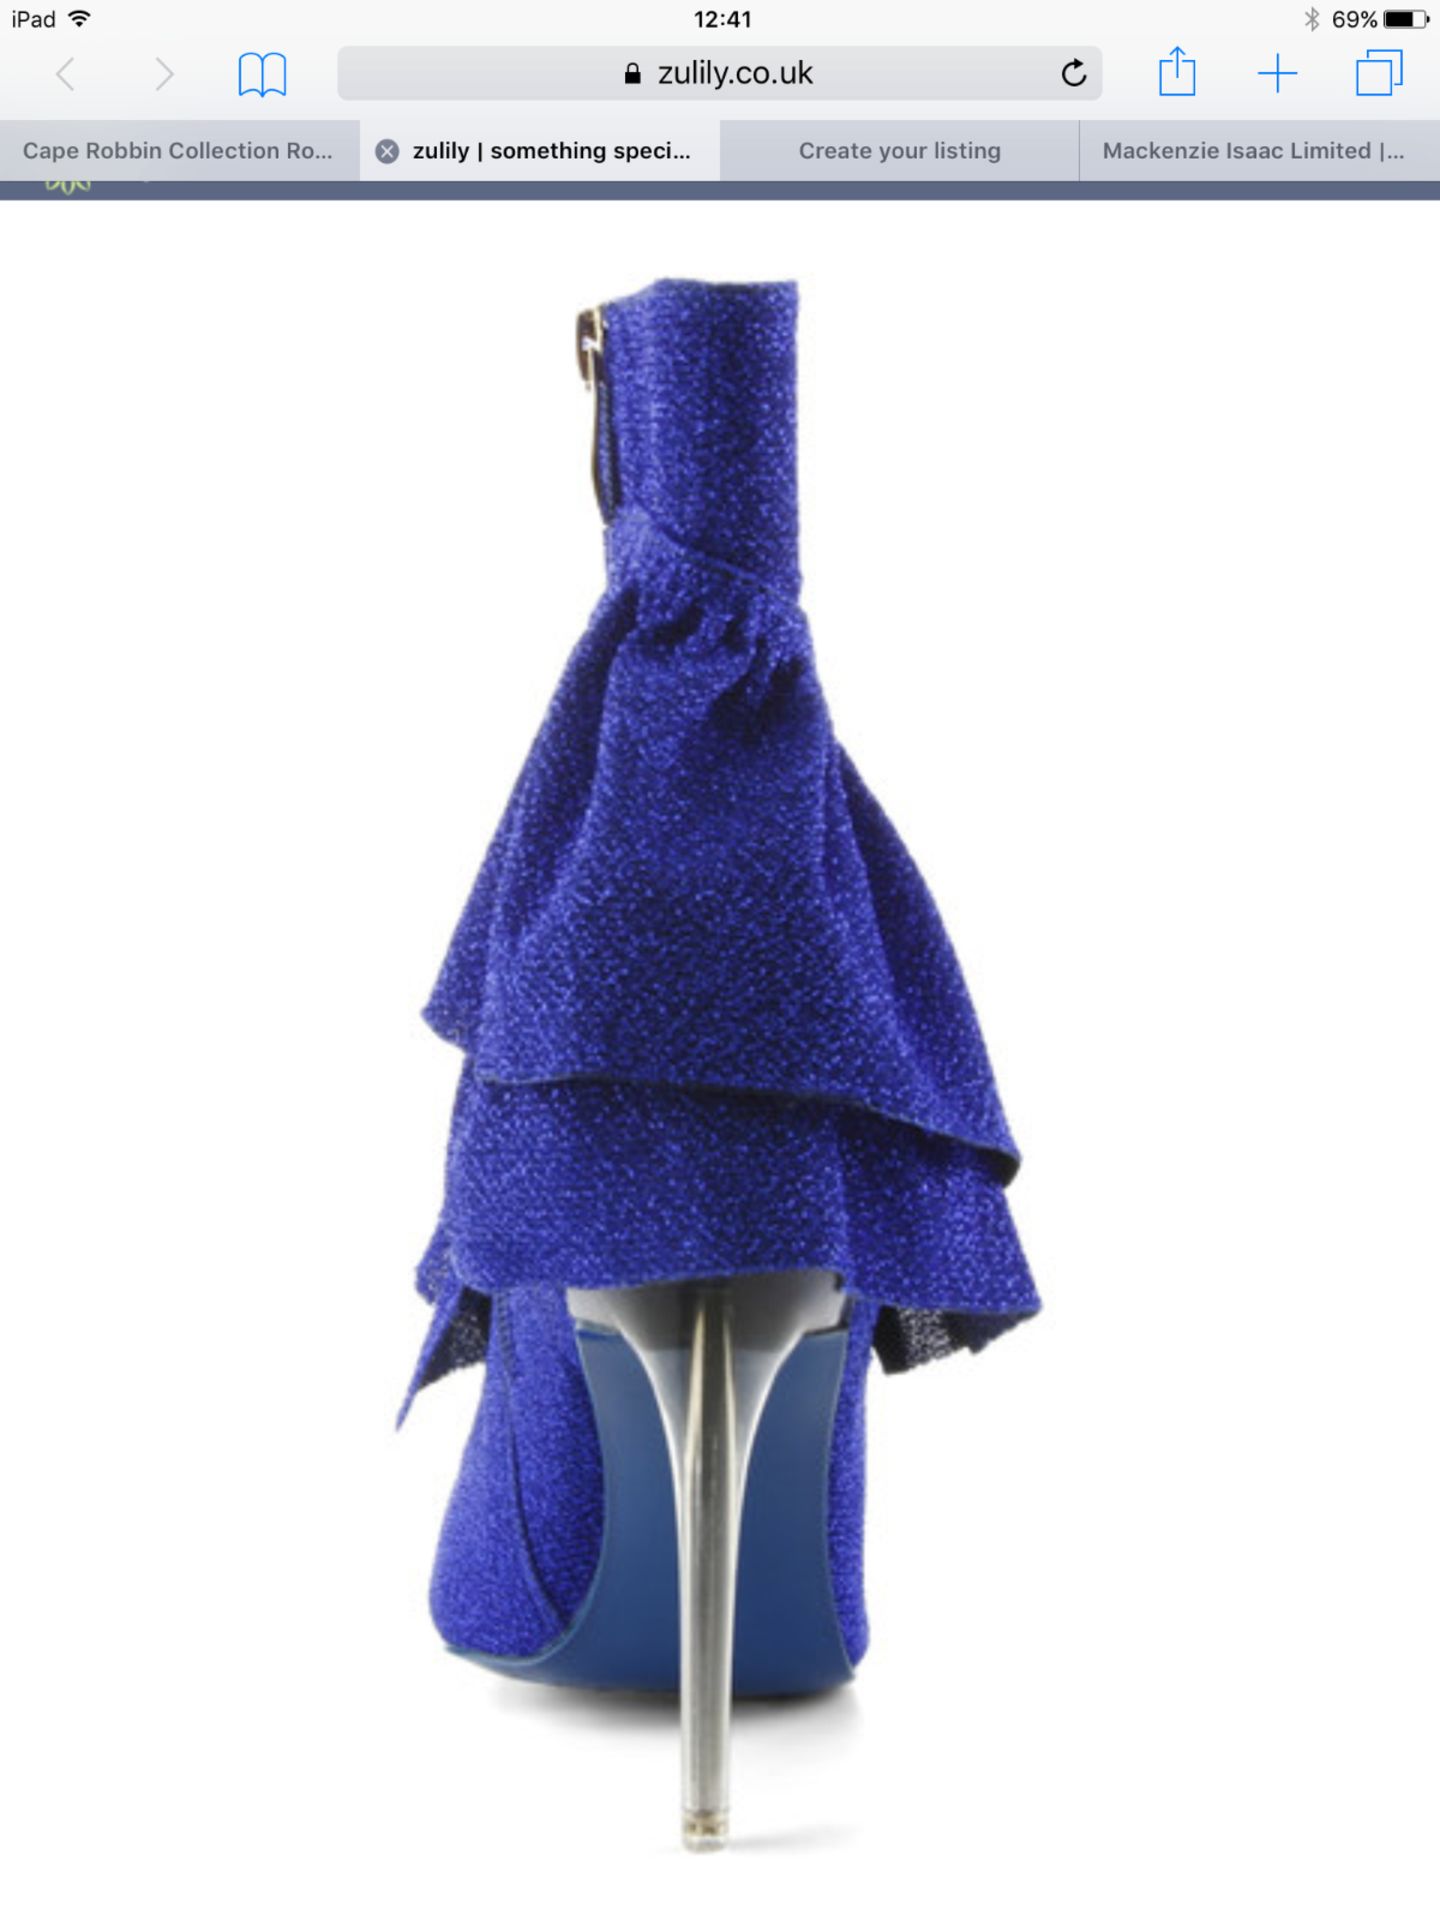 Cape Robbin Collection Royal Blue Beatrix Ruffle Boot, Size Eur 39, RRP £59.99 (New with box) [ - Image 5 of 7